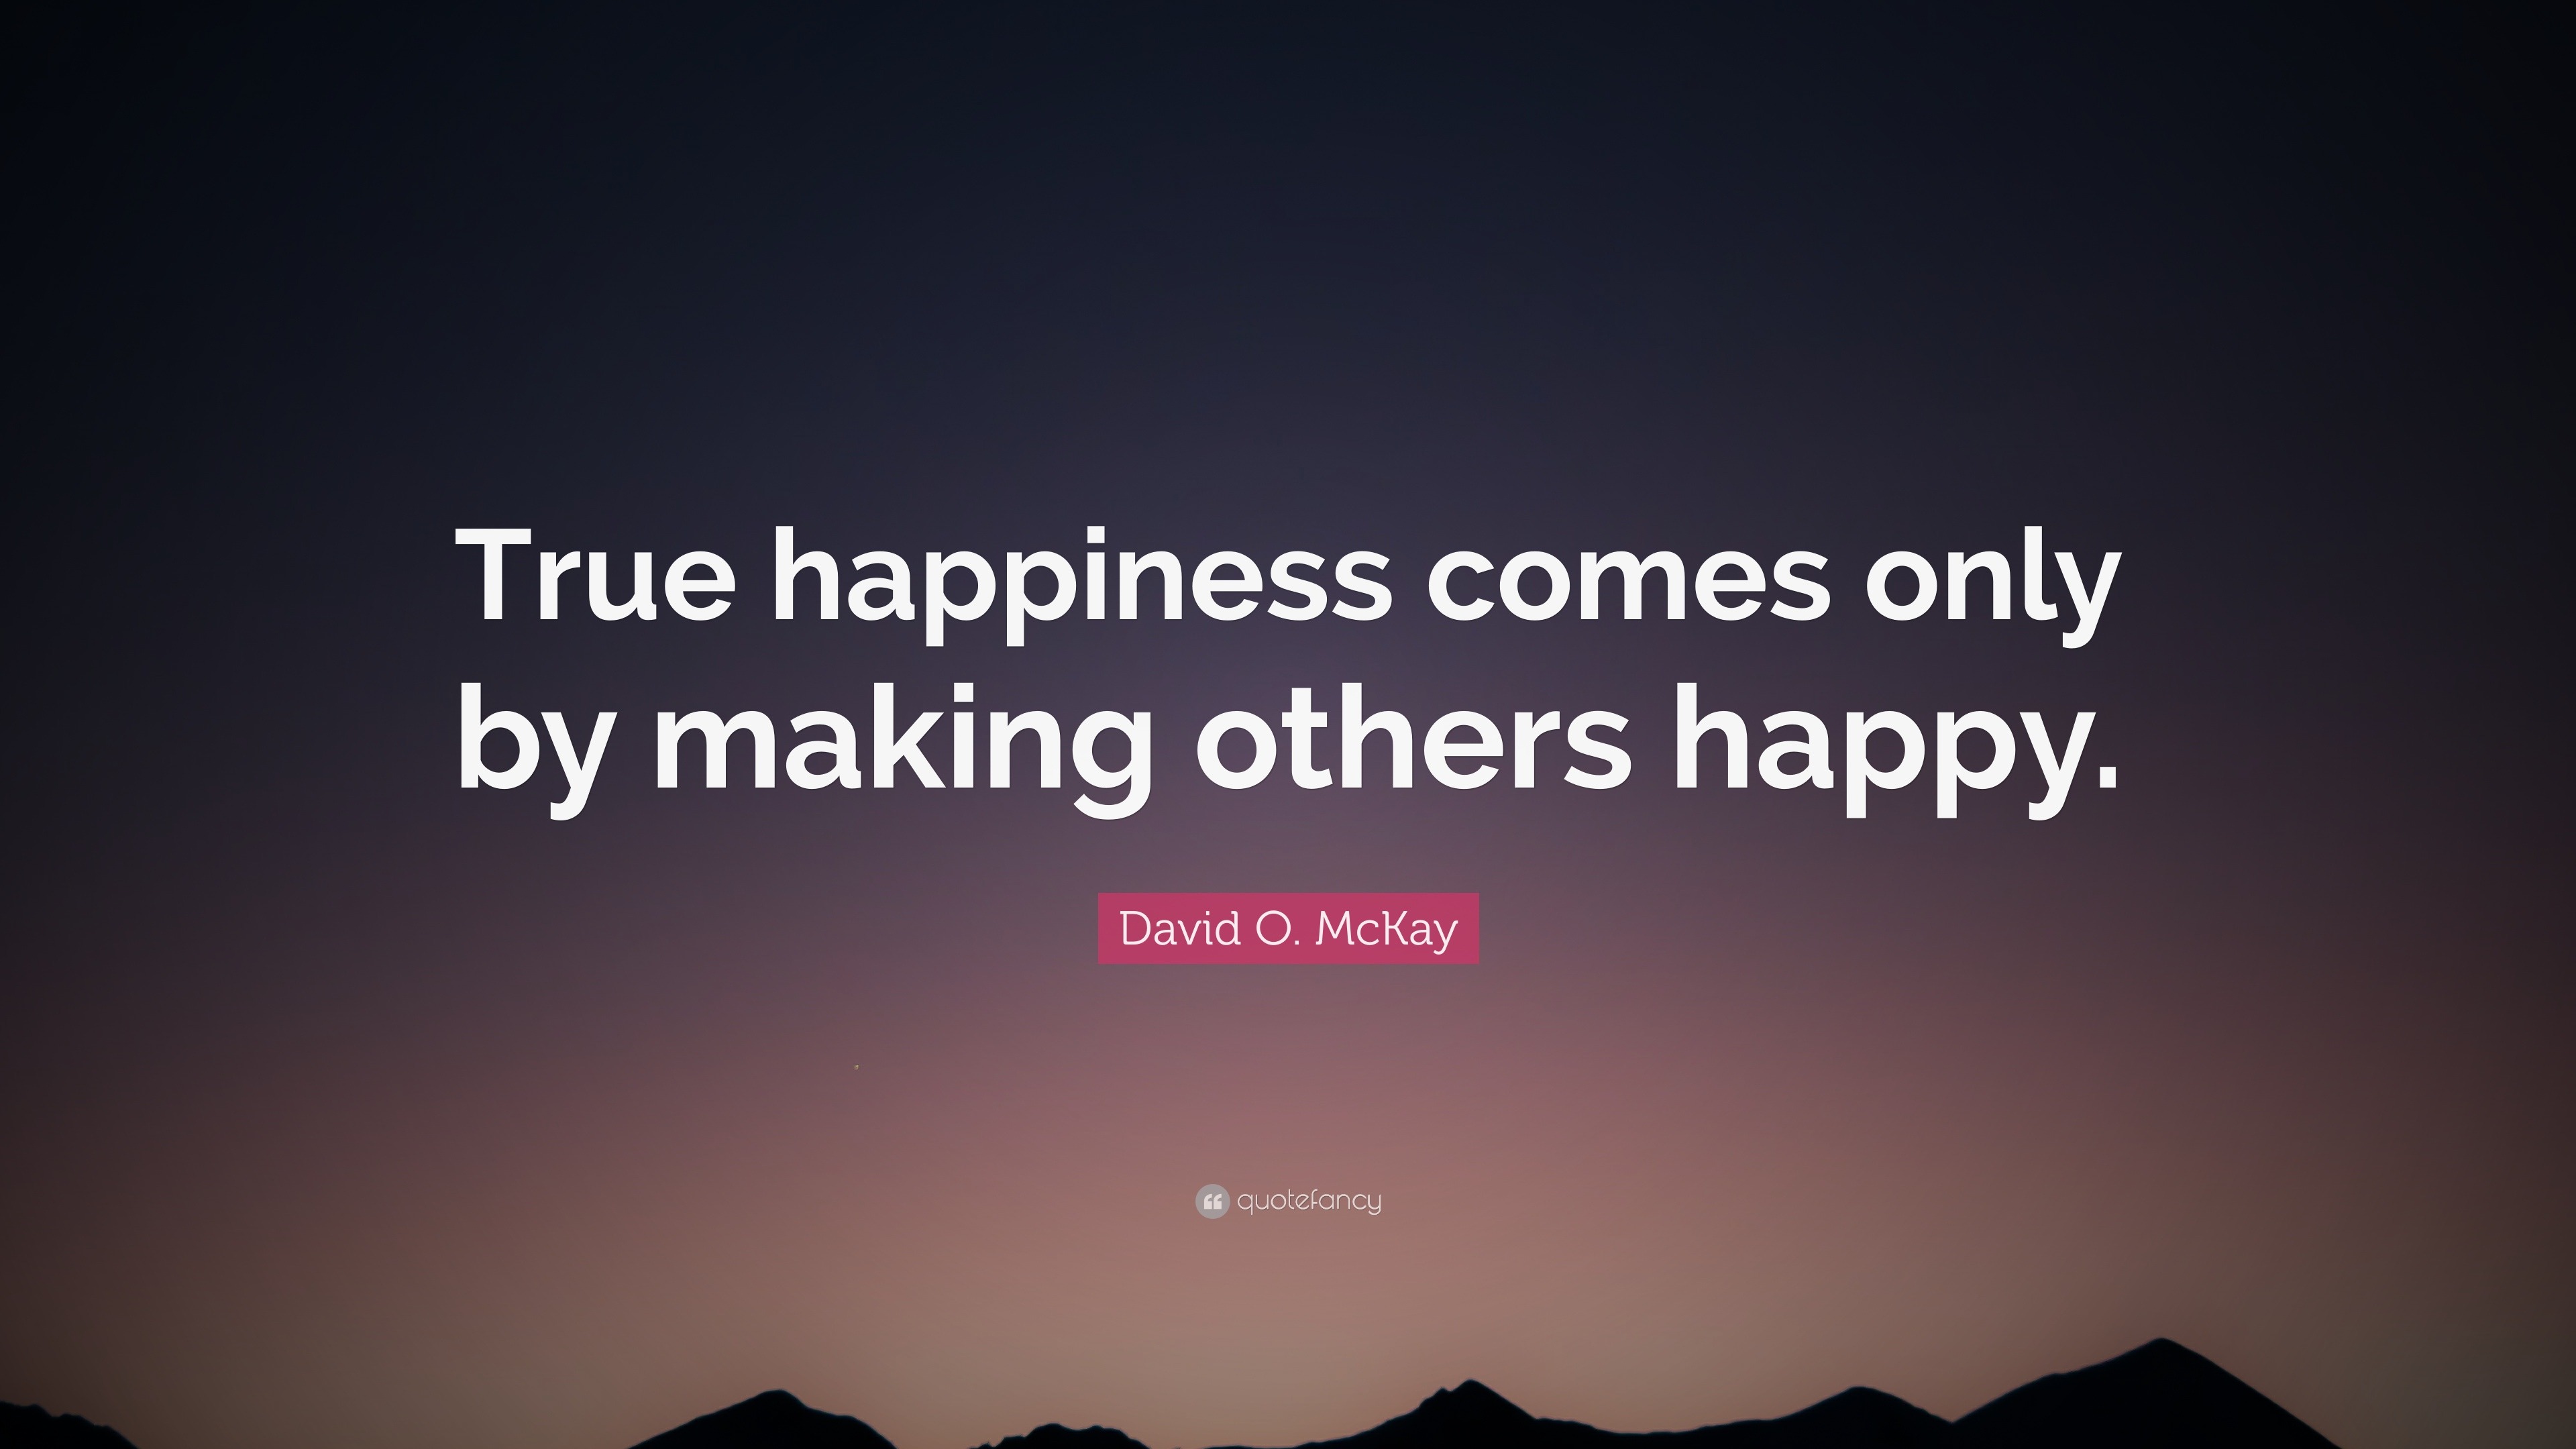 Quotes For Making Others Happy - Lark Sharla